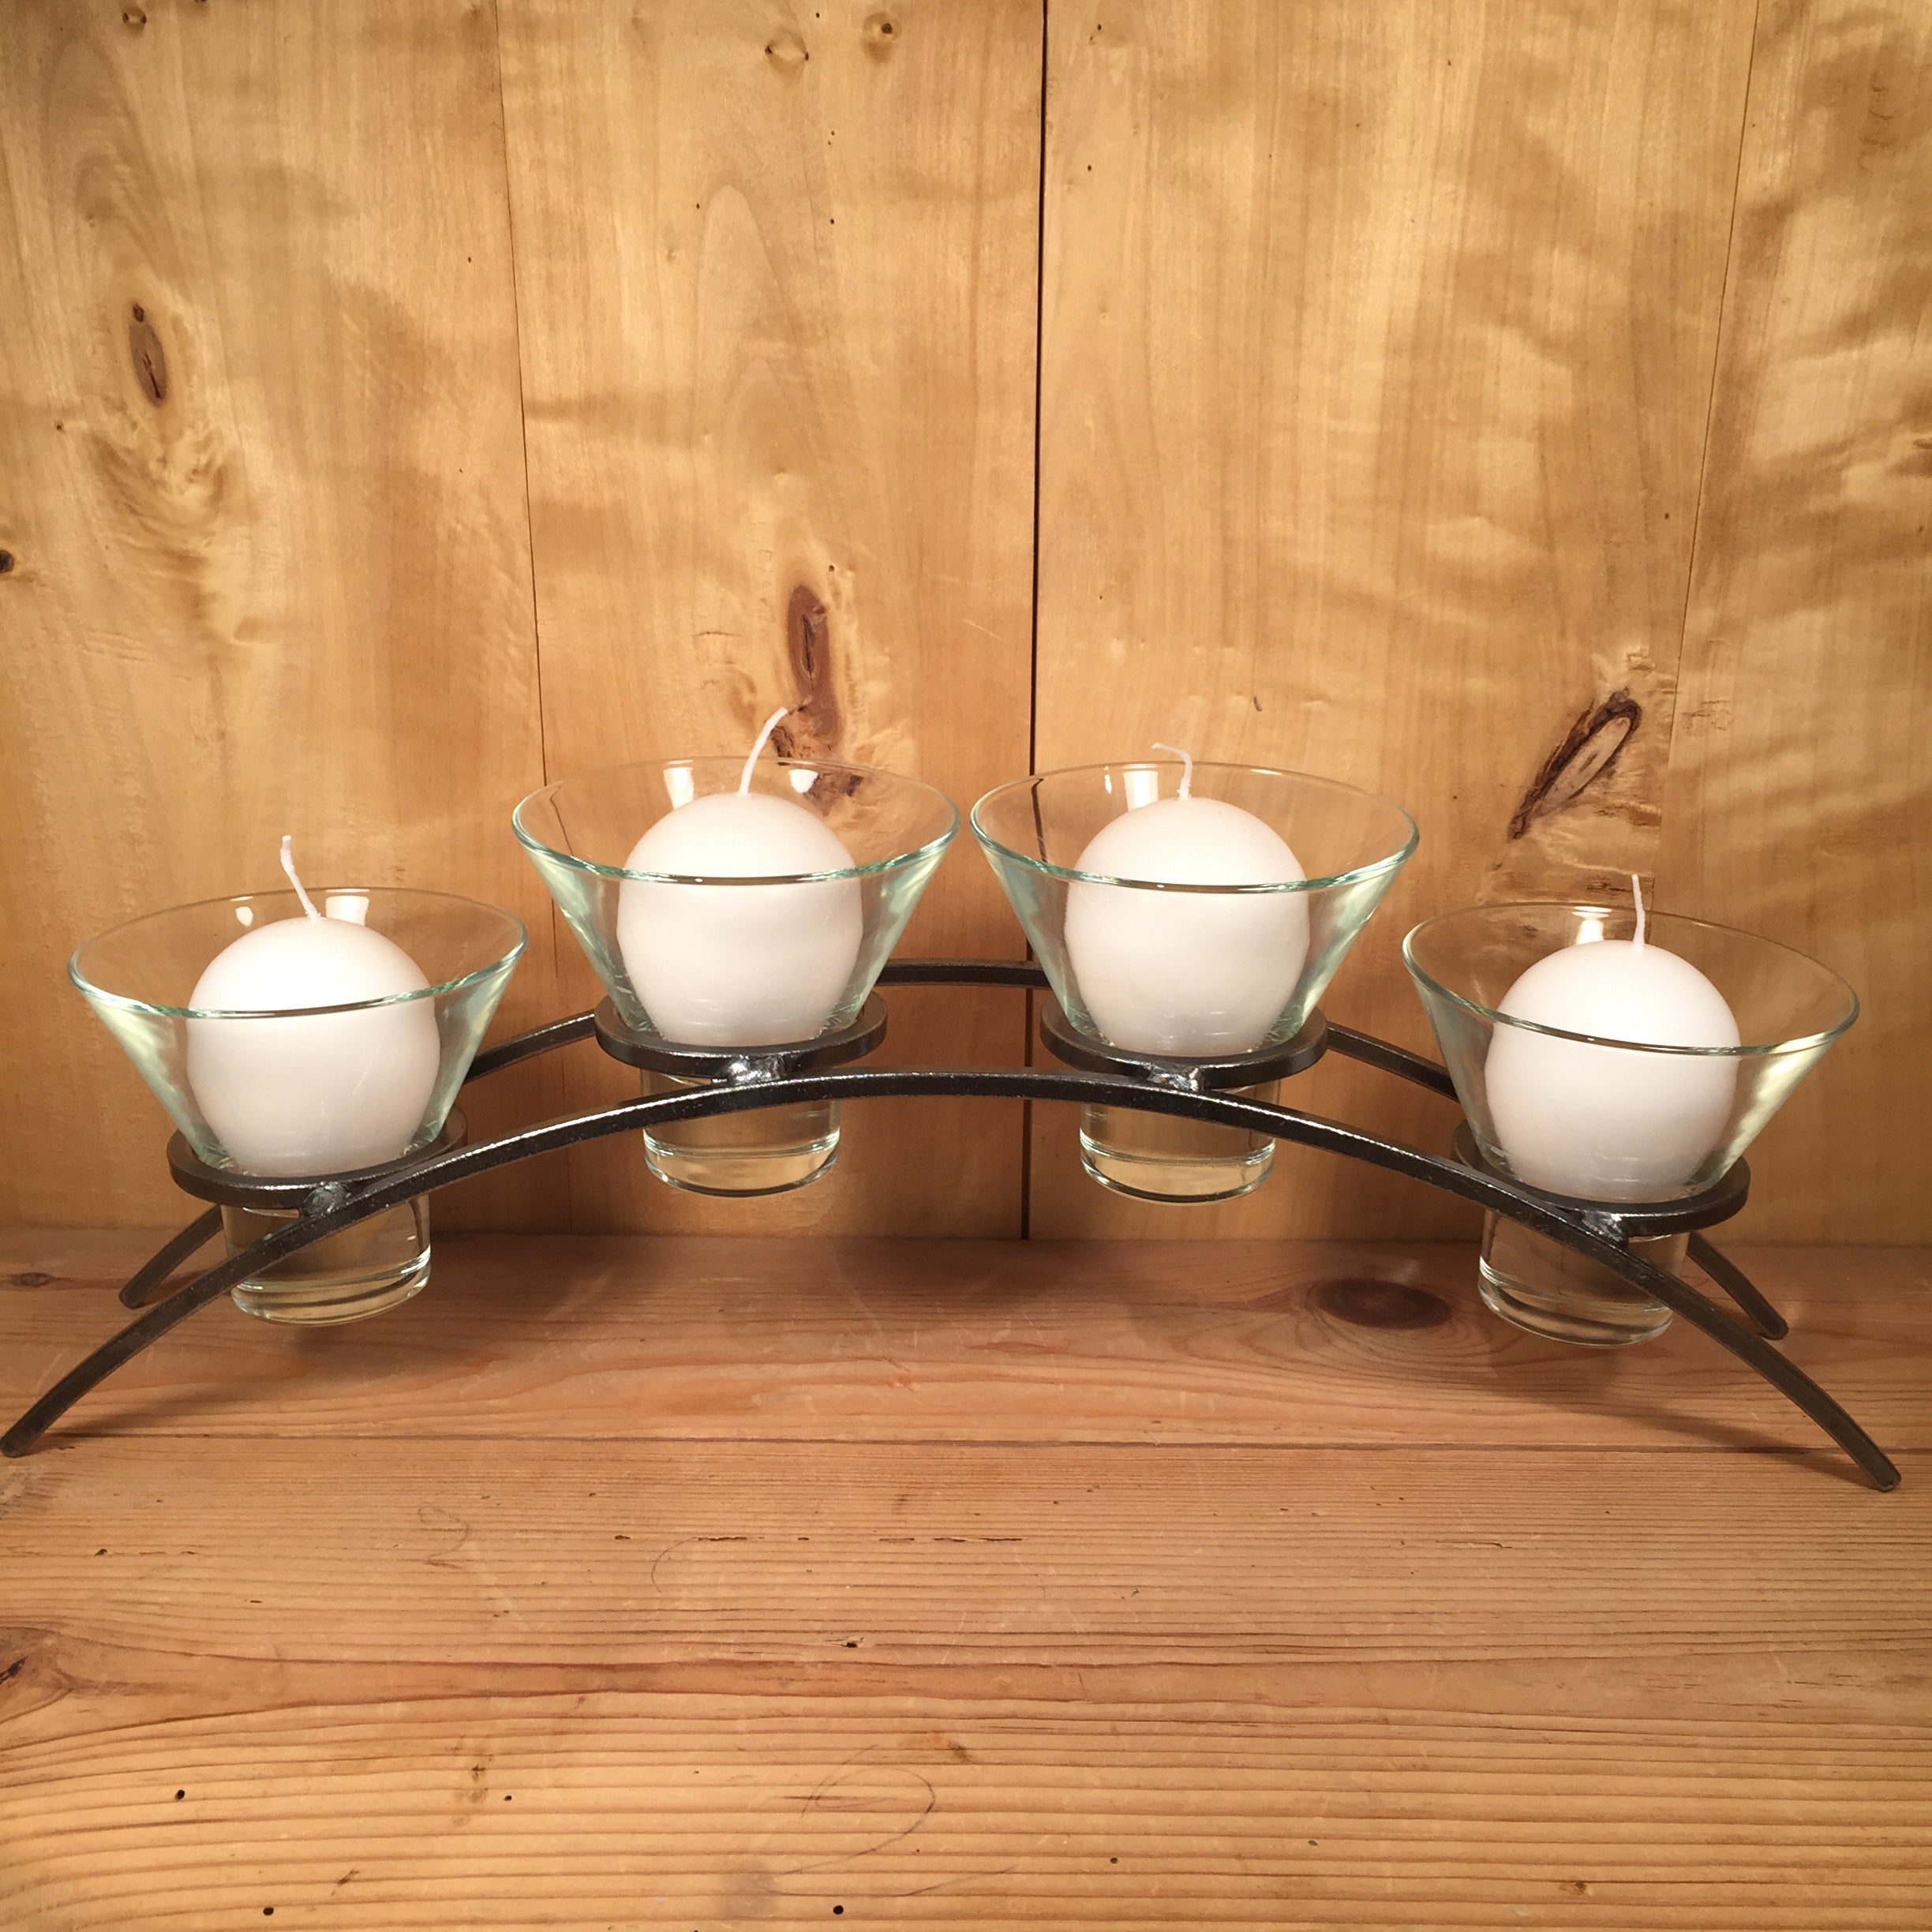 Candle Holder: Arched Danish Iron Candle Holder for 4 Candles